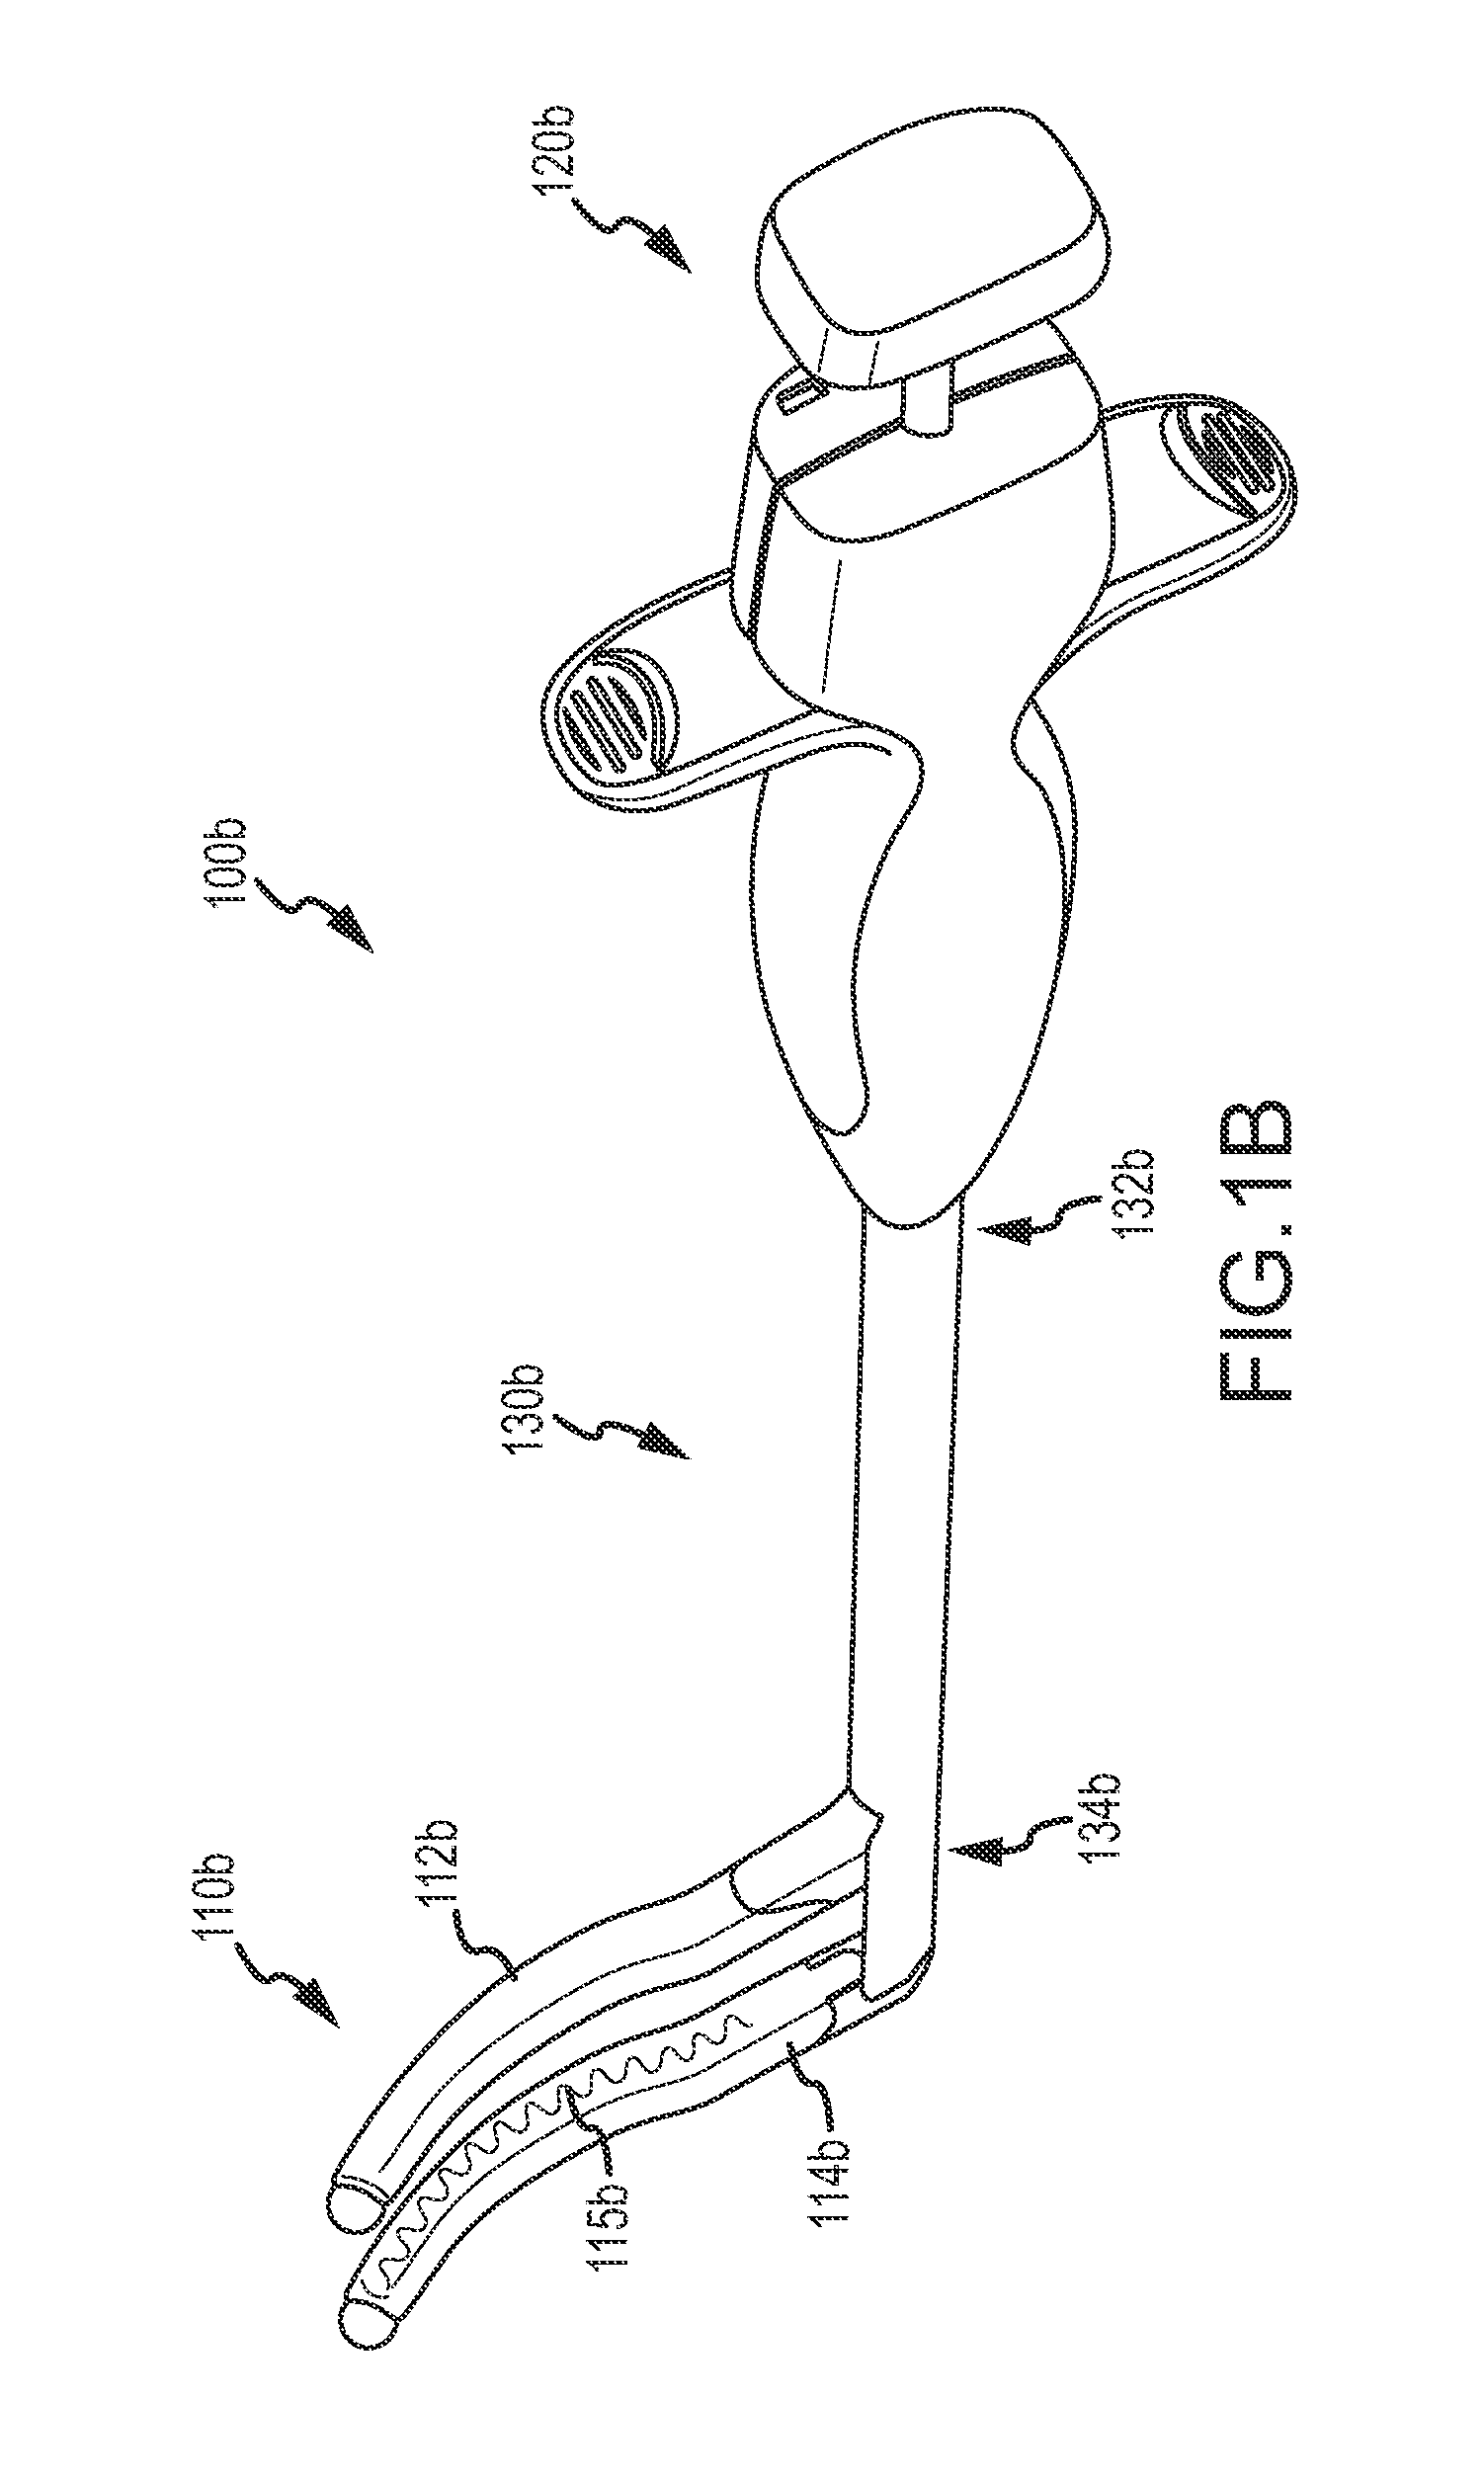 Adjustable clamp systems and methods